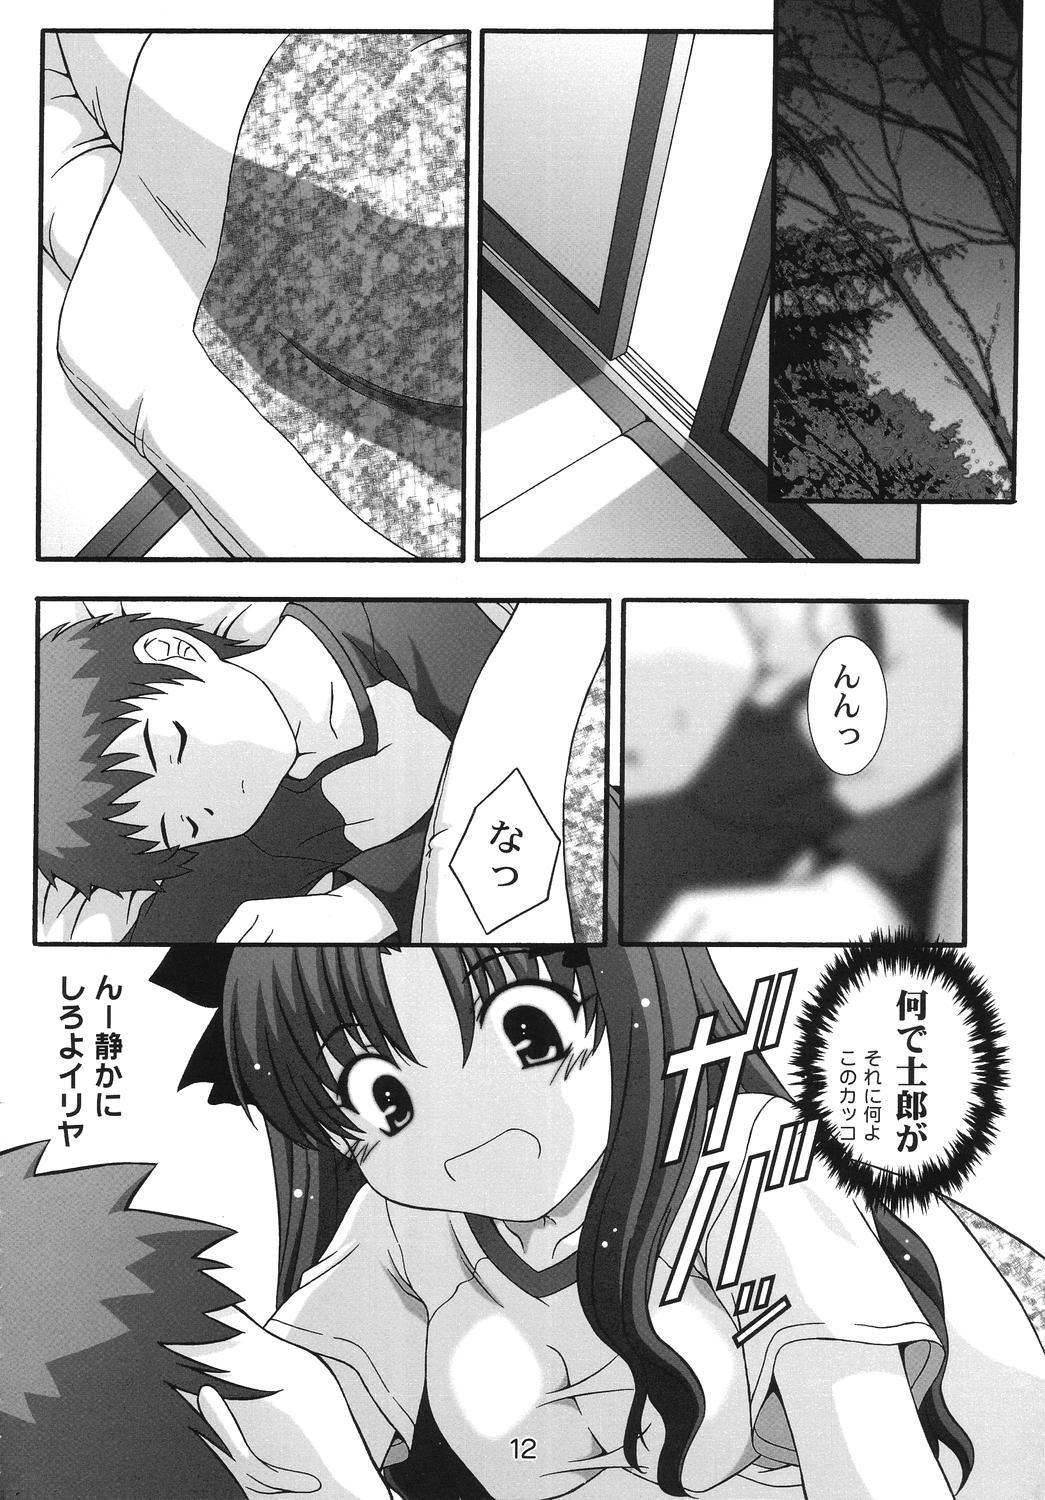 Negro SECRET FILE NEXT 11 - Fate is capricious - Fate stay night Mommy - Page 11